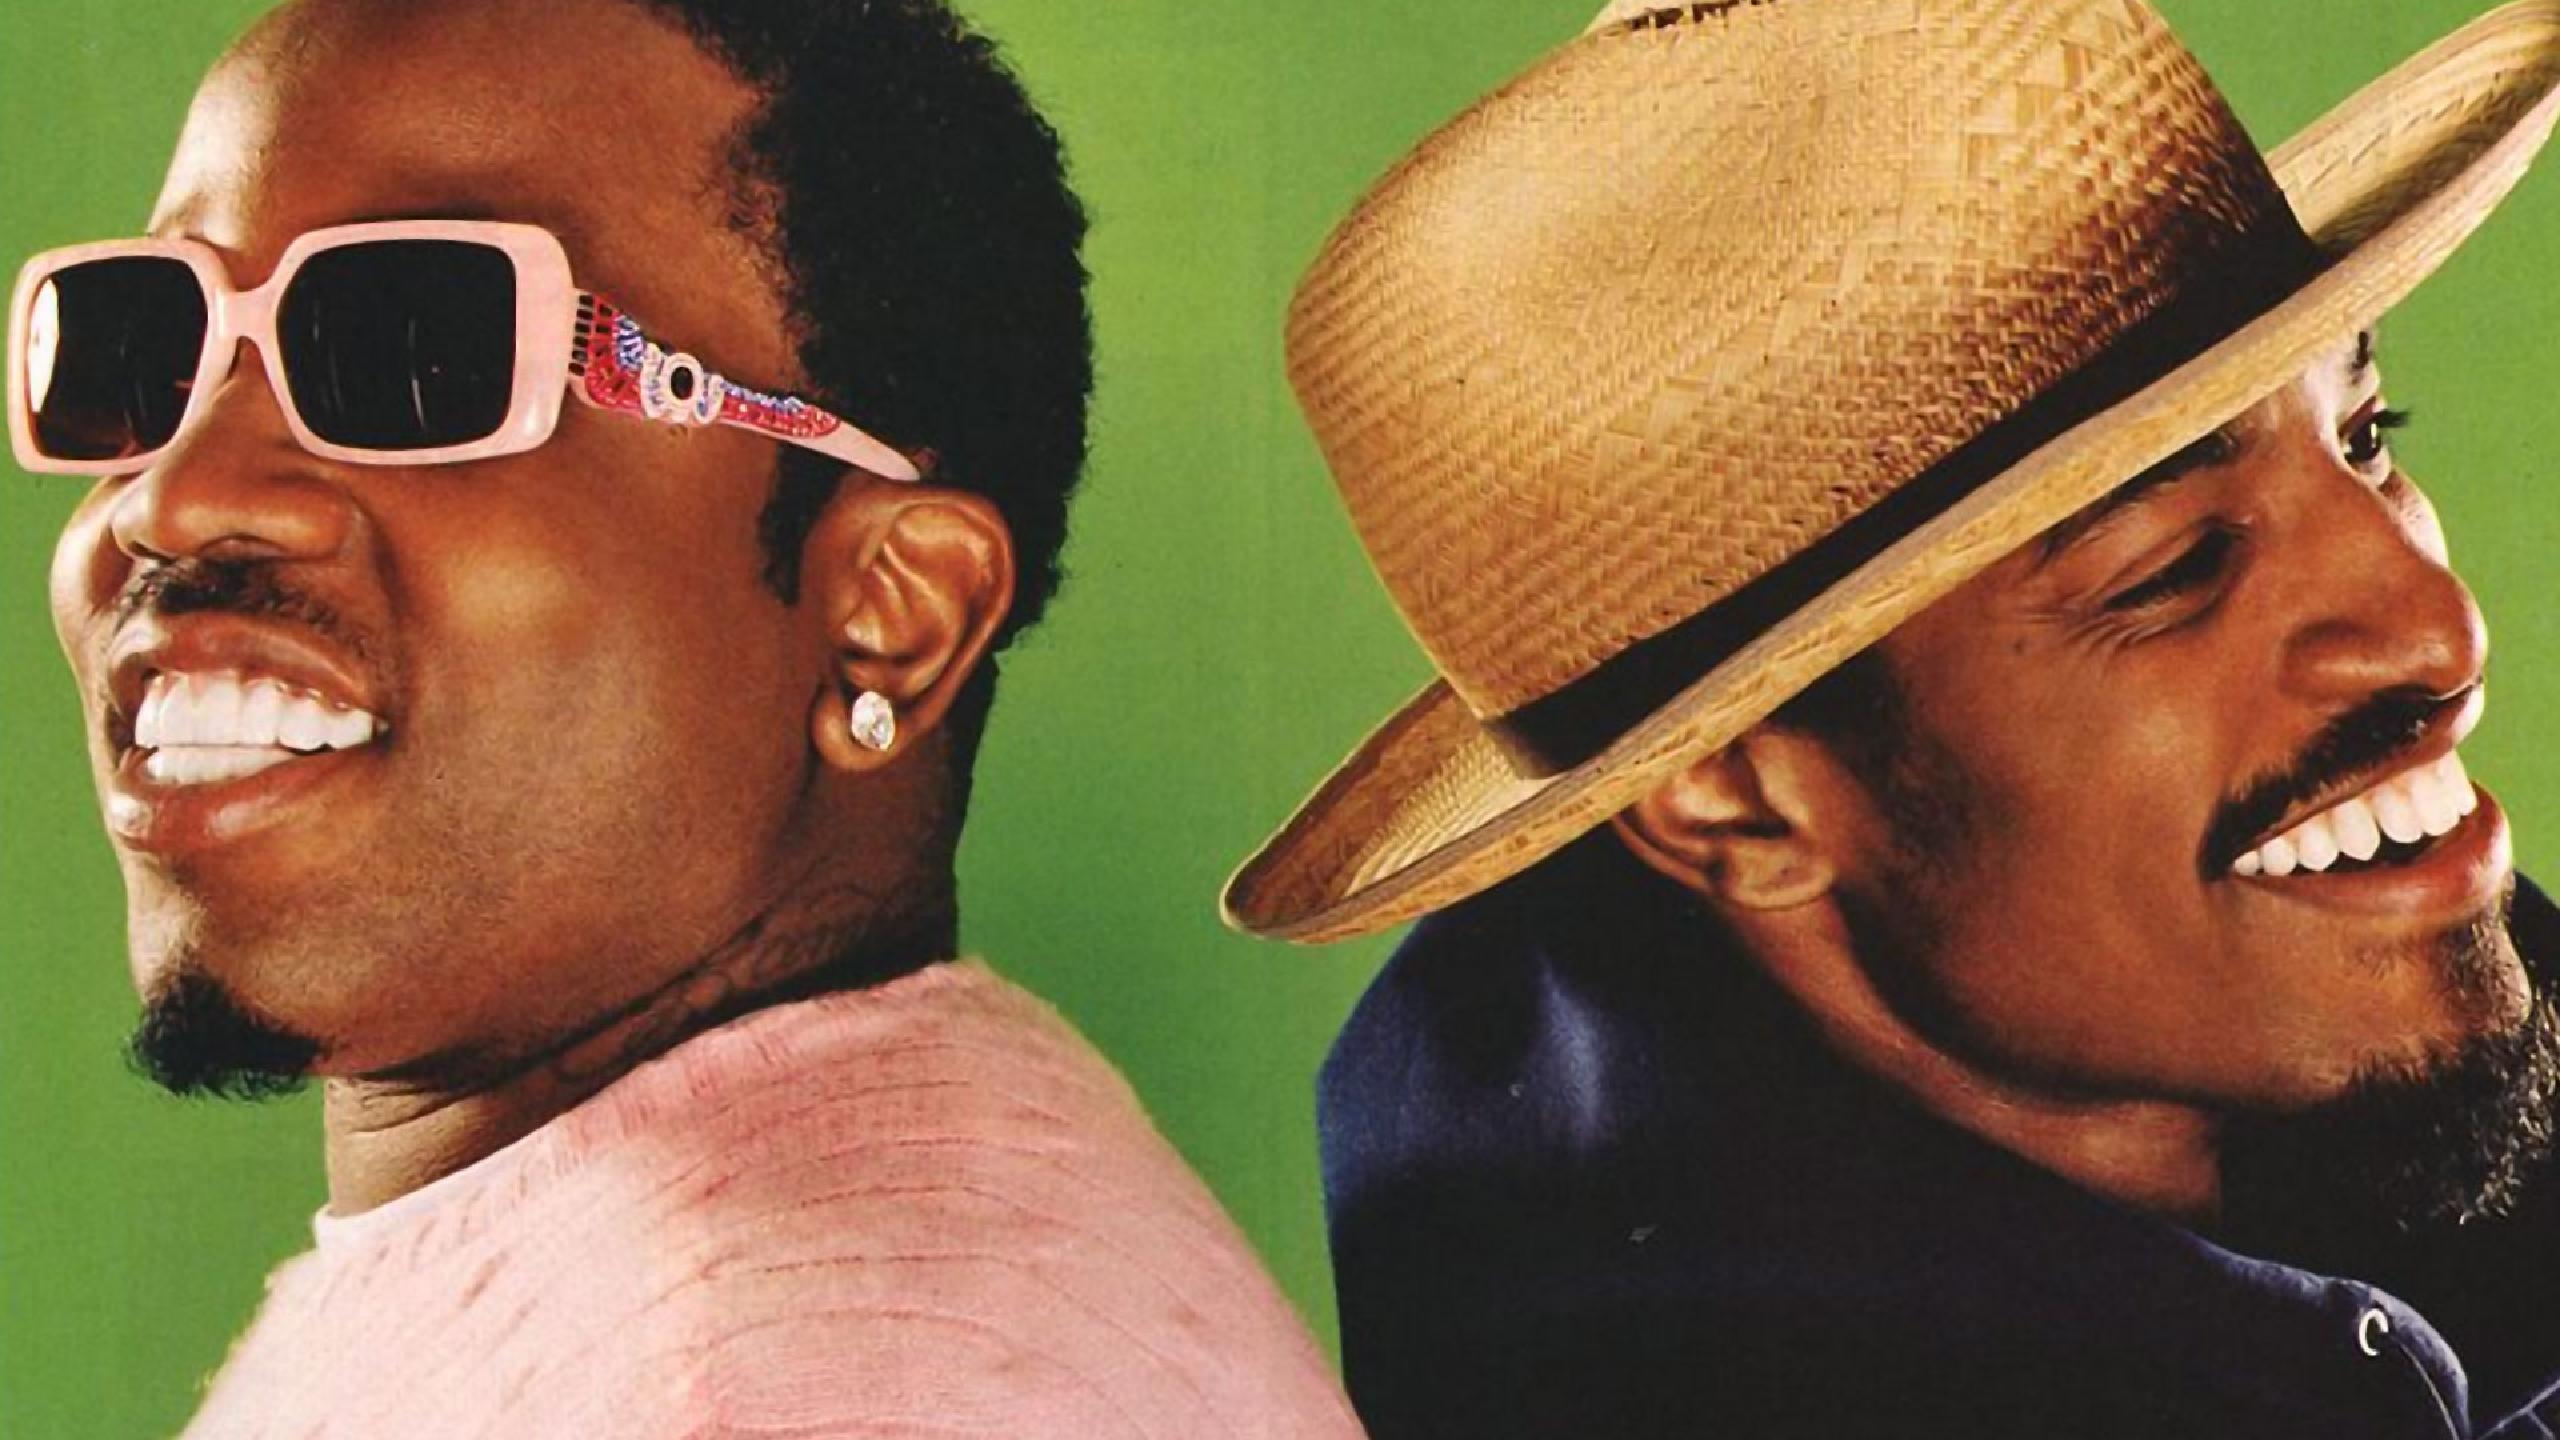 Outkast have been nominated for the 2020 Songwriters Hall of Fame